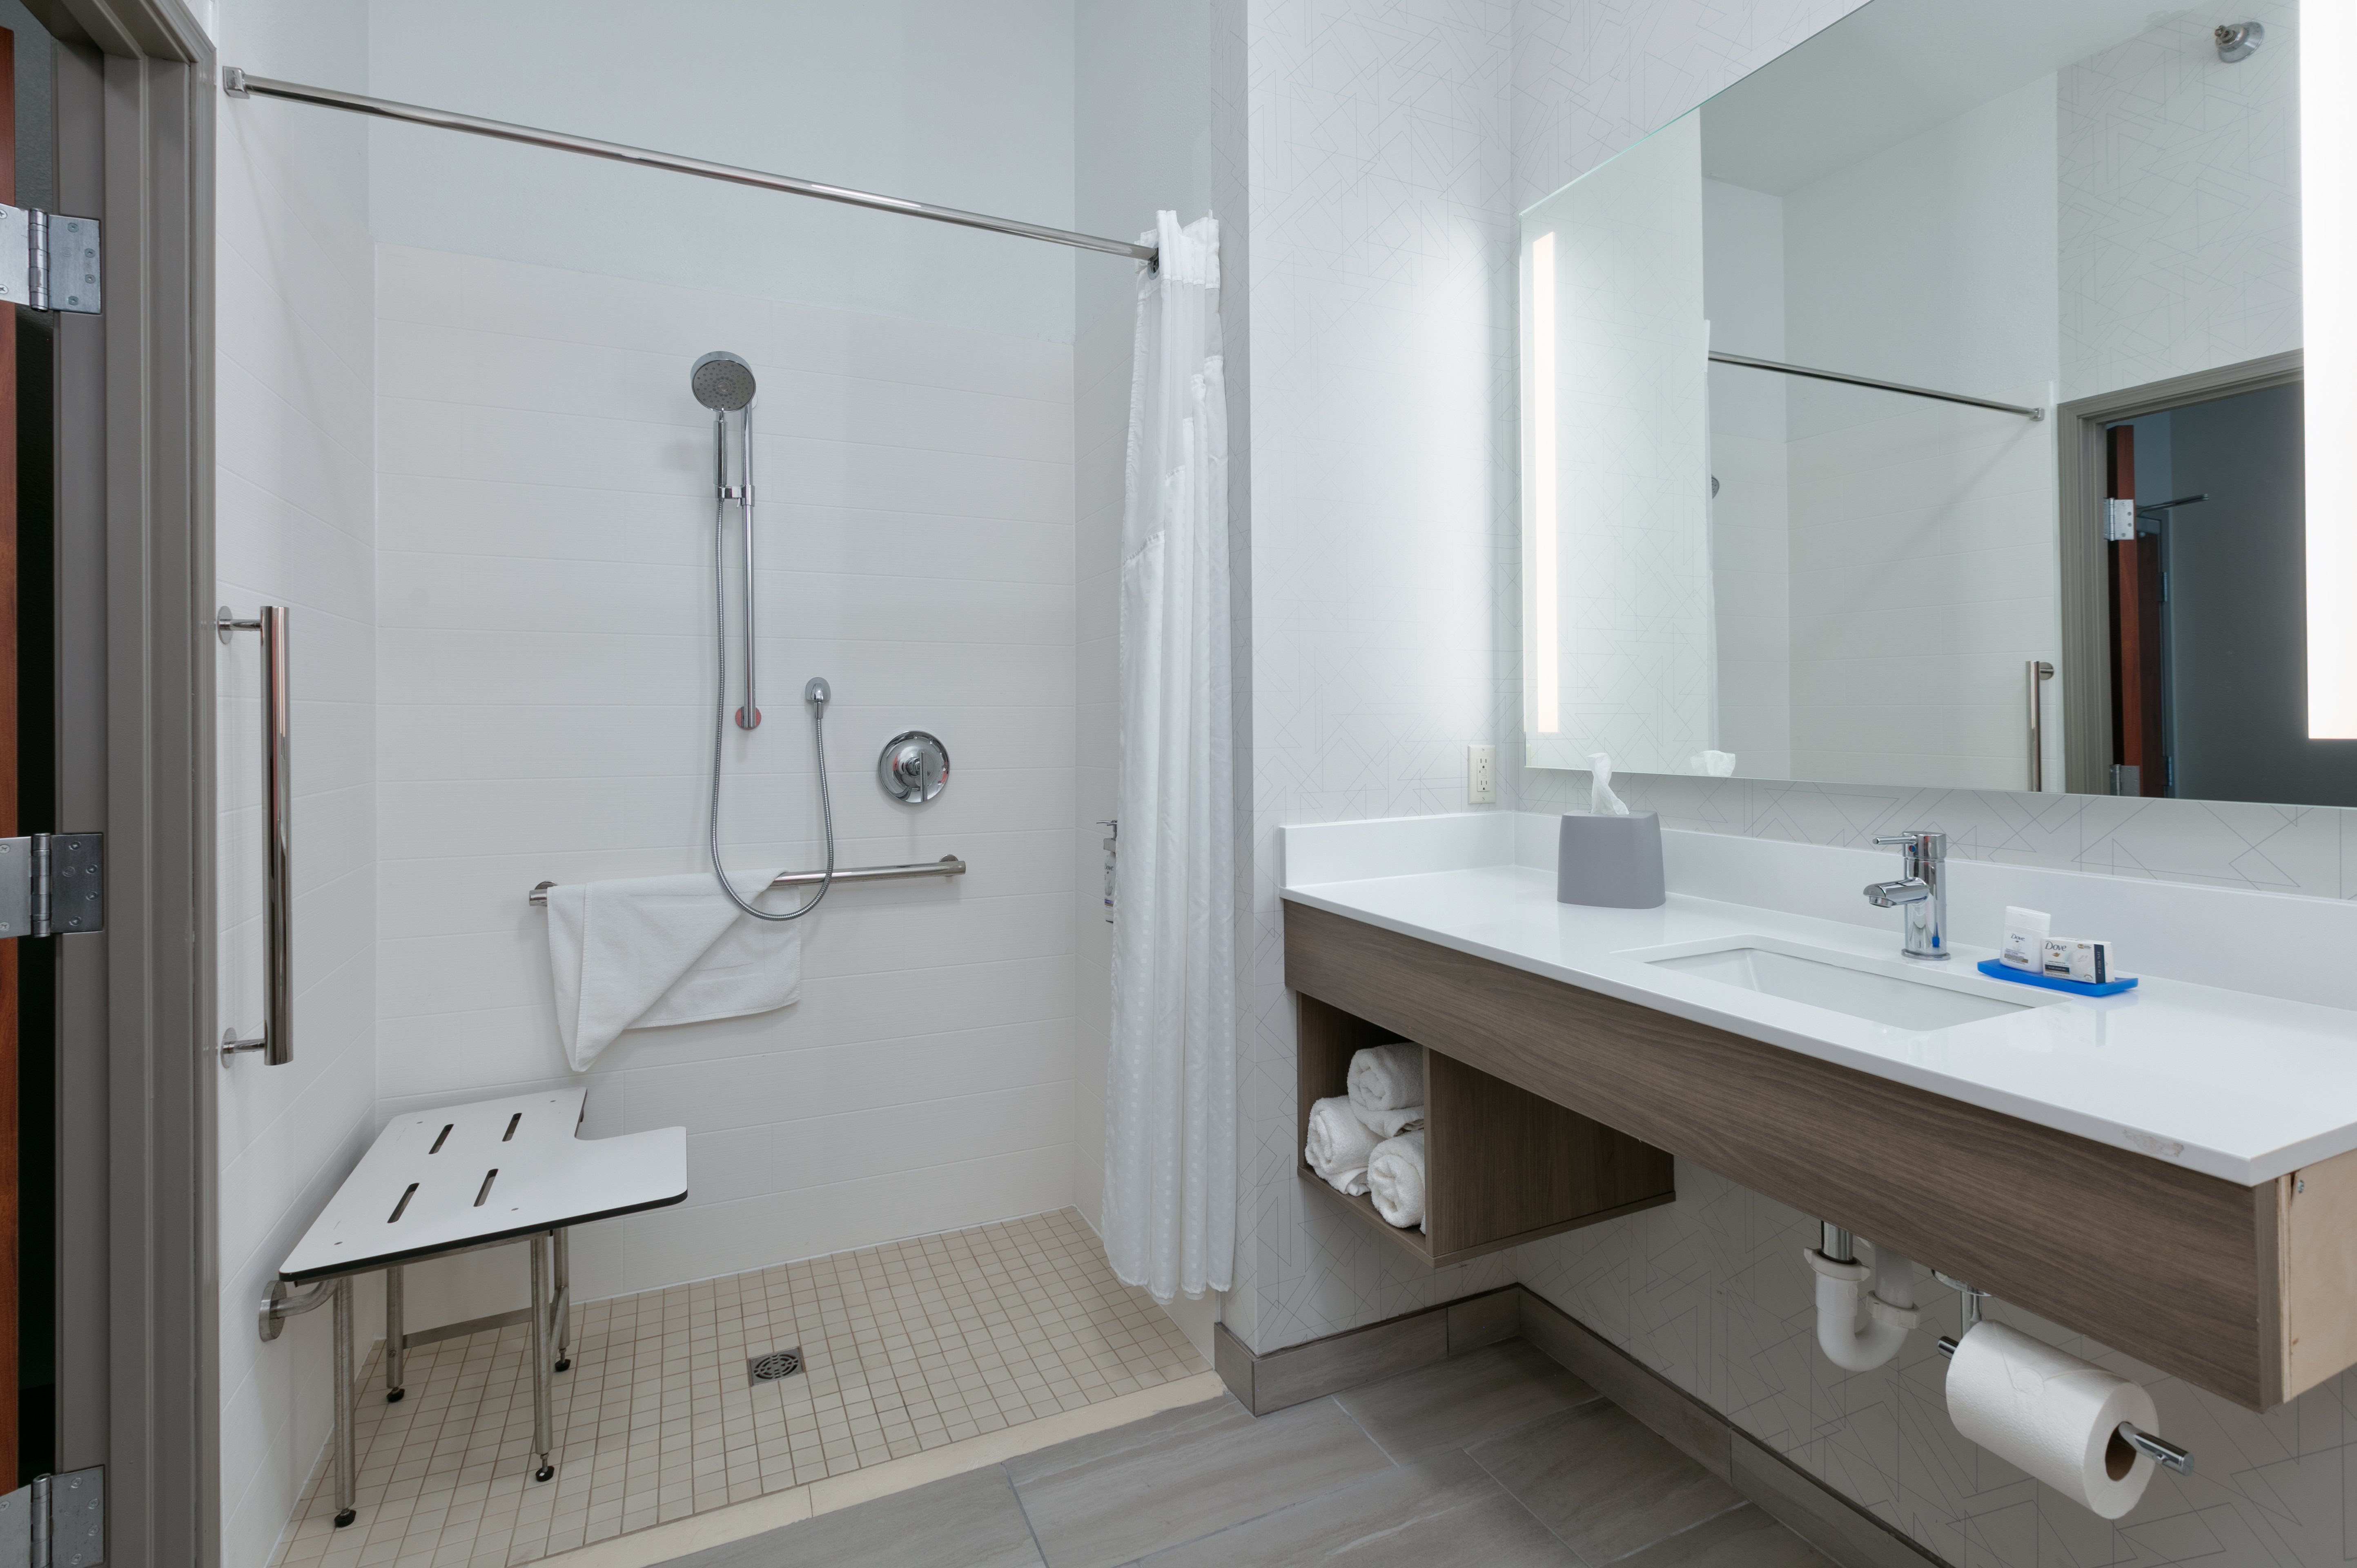 Accessible bathroom with roll-in shower, seat and stability bars. 